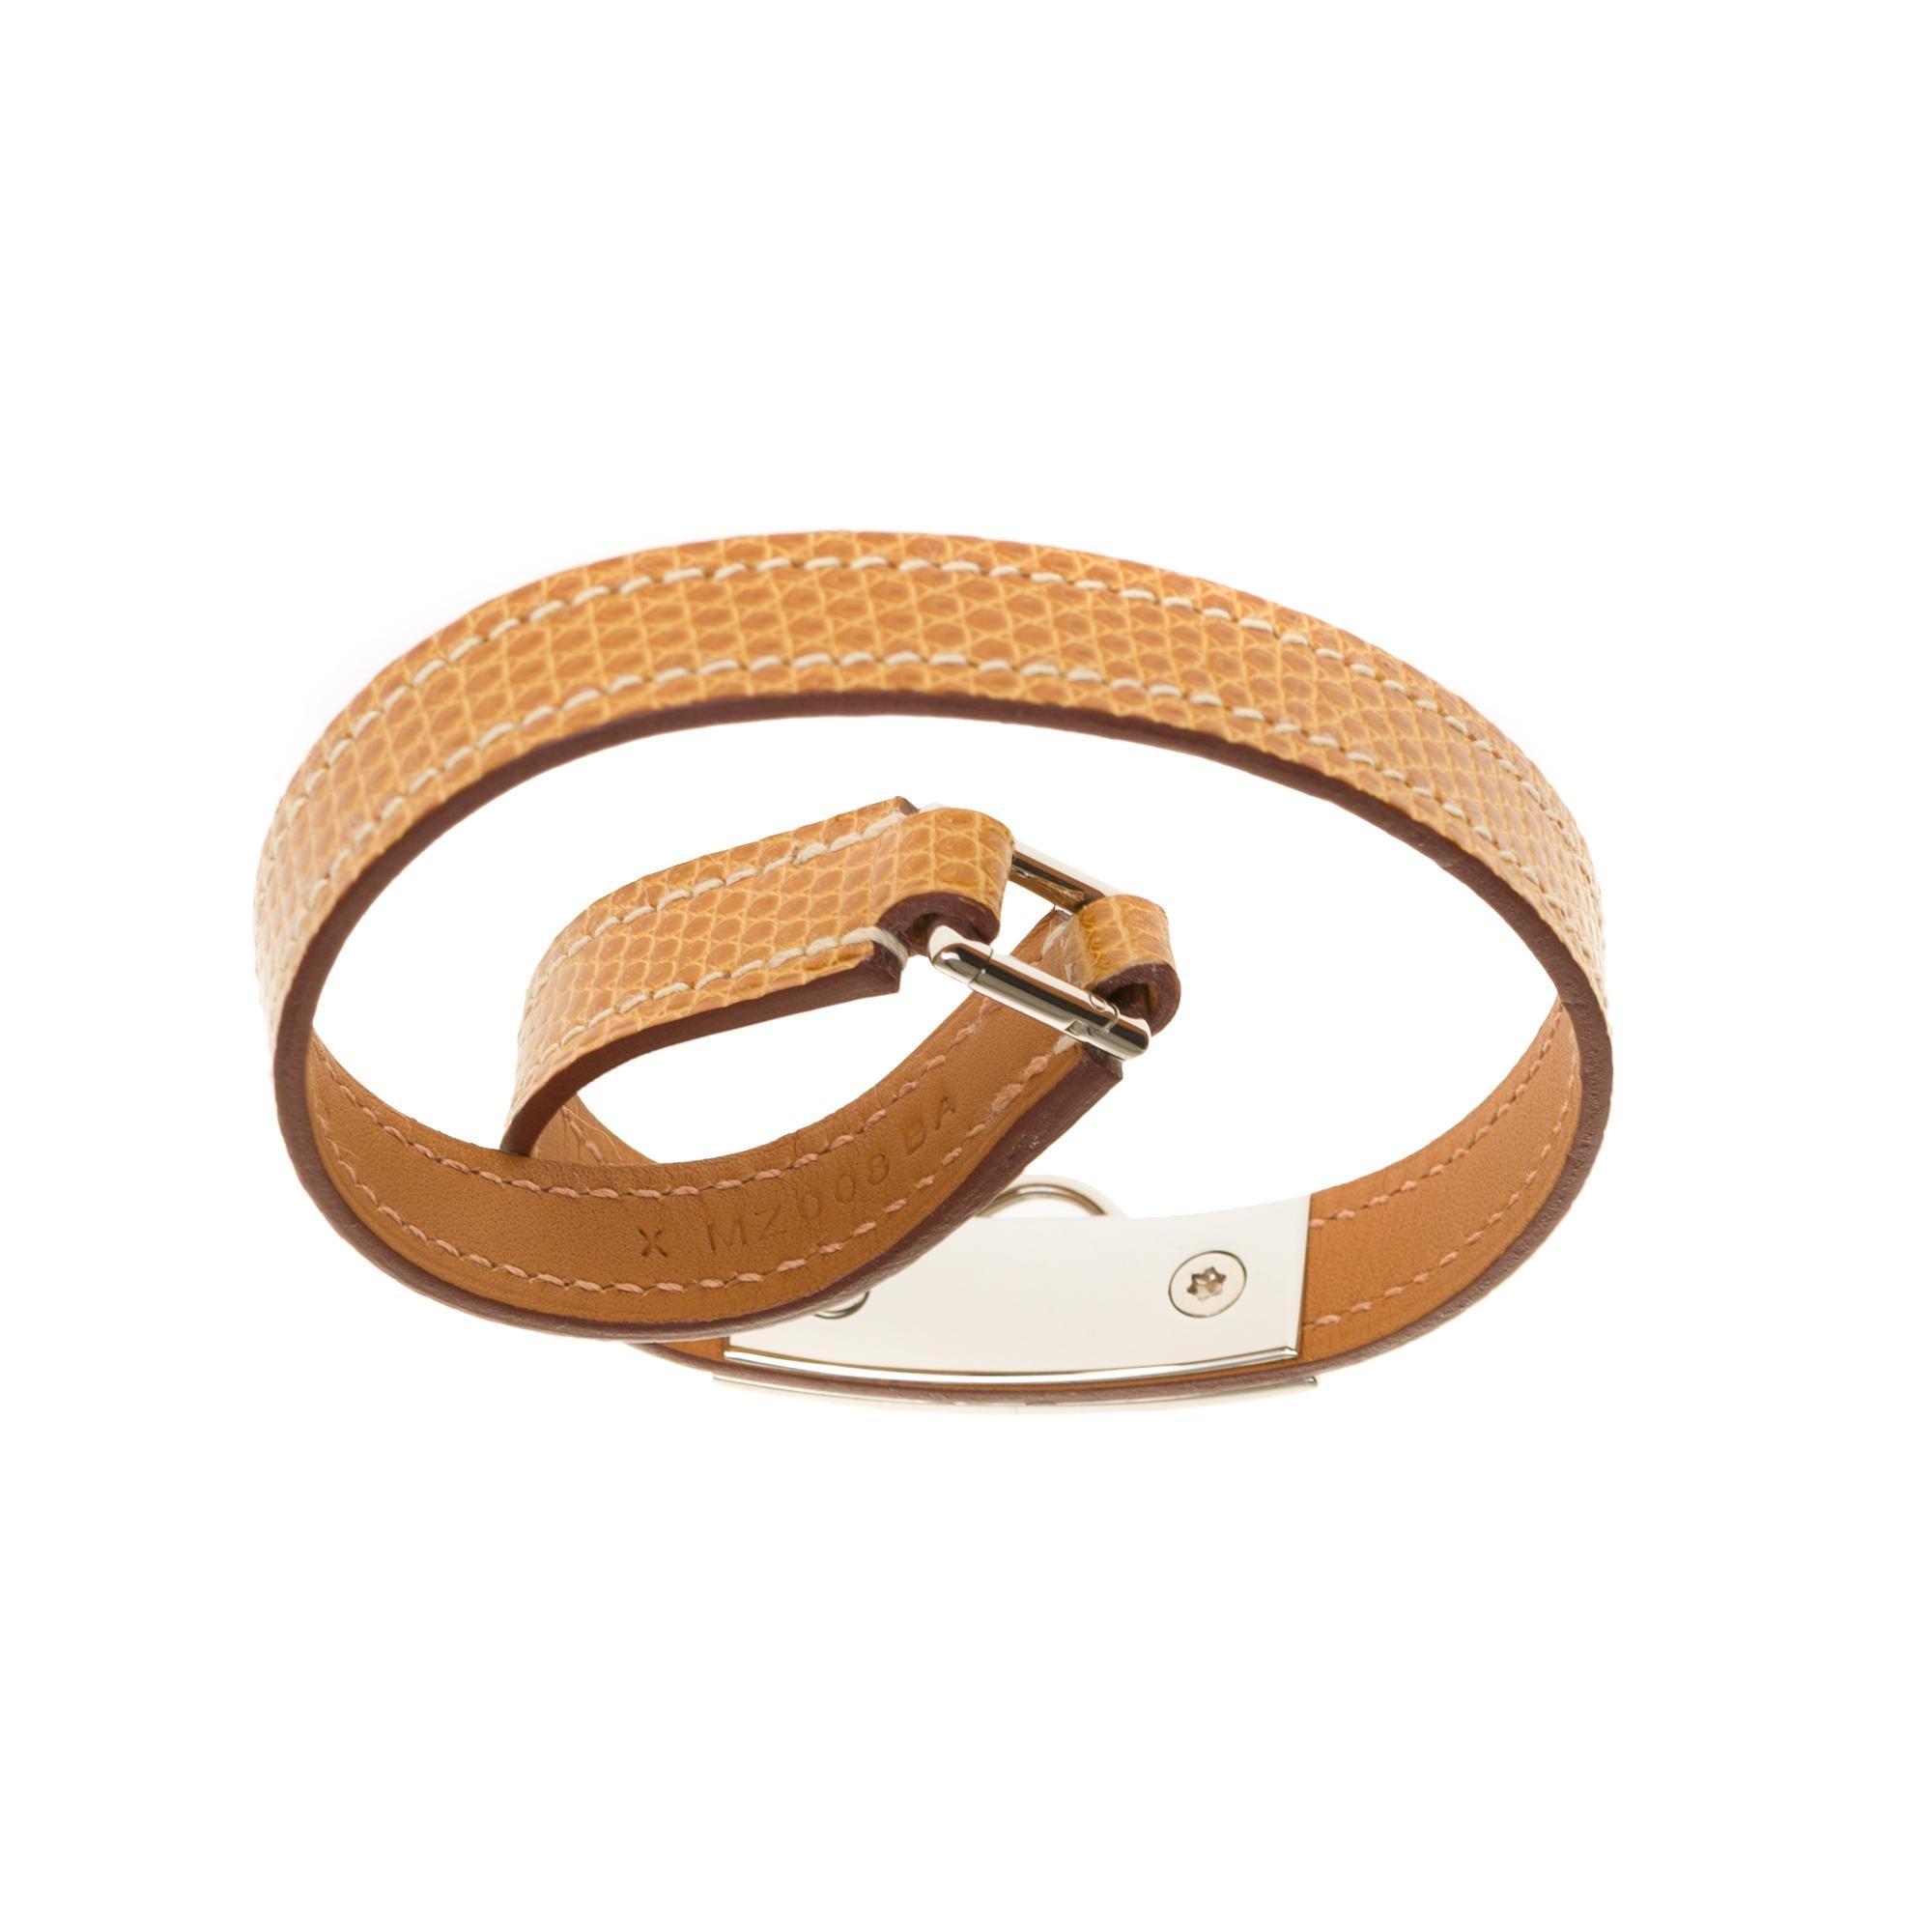 Hermès Rivale double tour bracelet in smooth beige lizard leather, palladium-plated silver-plated metal jewellery.
Signature: 